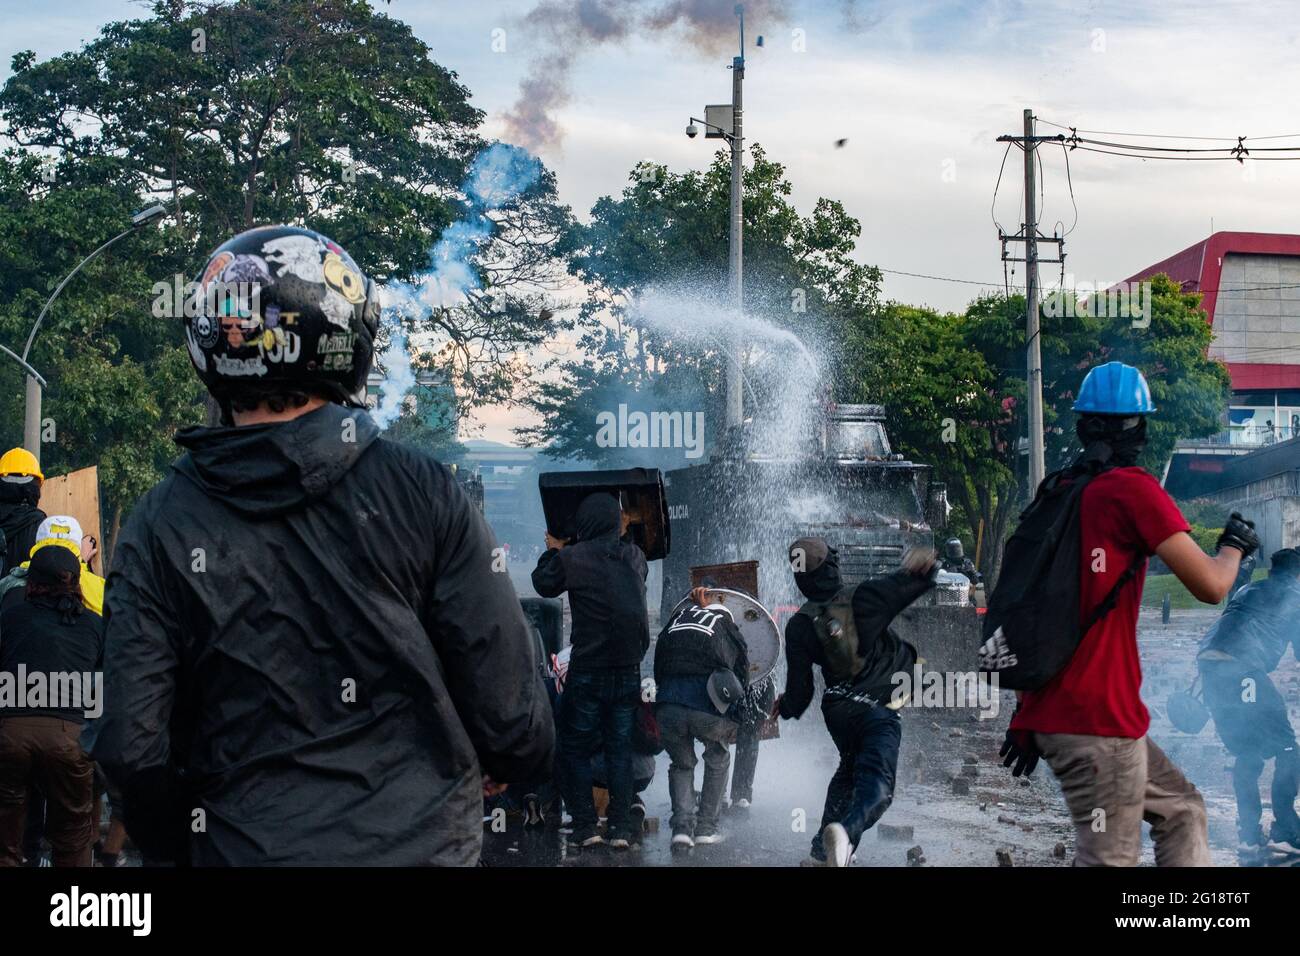 A member of the front line retuns a tear gas canister to a riot armored truck from Colombia's riot police (ESMAD) while it shoots water to demonstrators as clashes between demonstrators and Colombia's riot police (ESMAD) erupt in Medellín, Colombia after several weeks of anti-government protest against President Ivan Duque's tax and health reforms and unrest and abuse of authority cases that leave at least 70 dead according to NGOs on June 4, 2021. Stock Photo